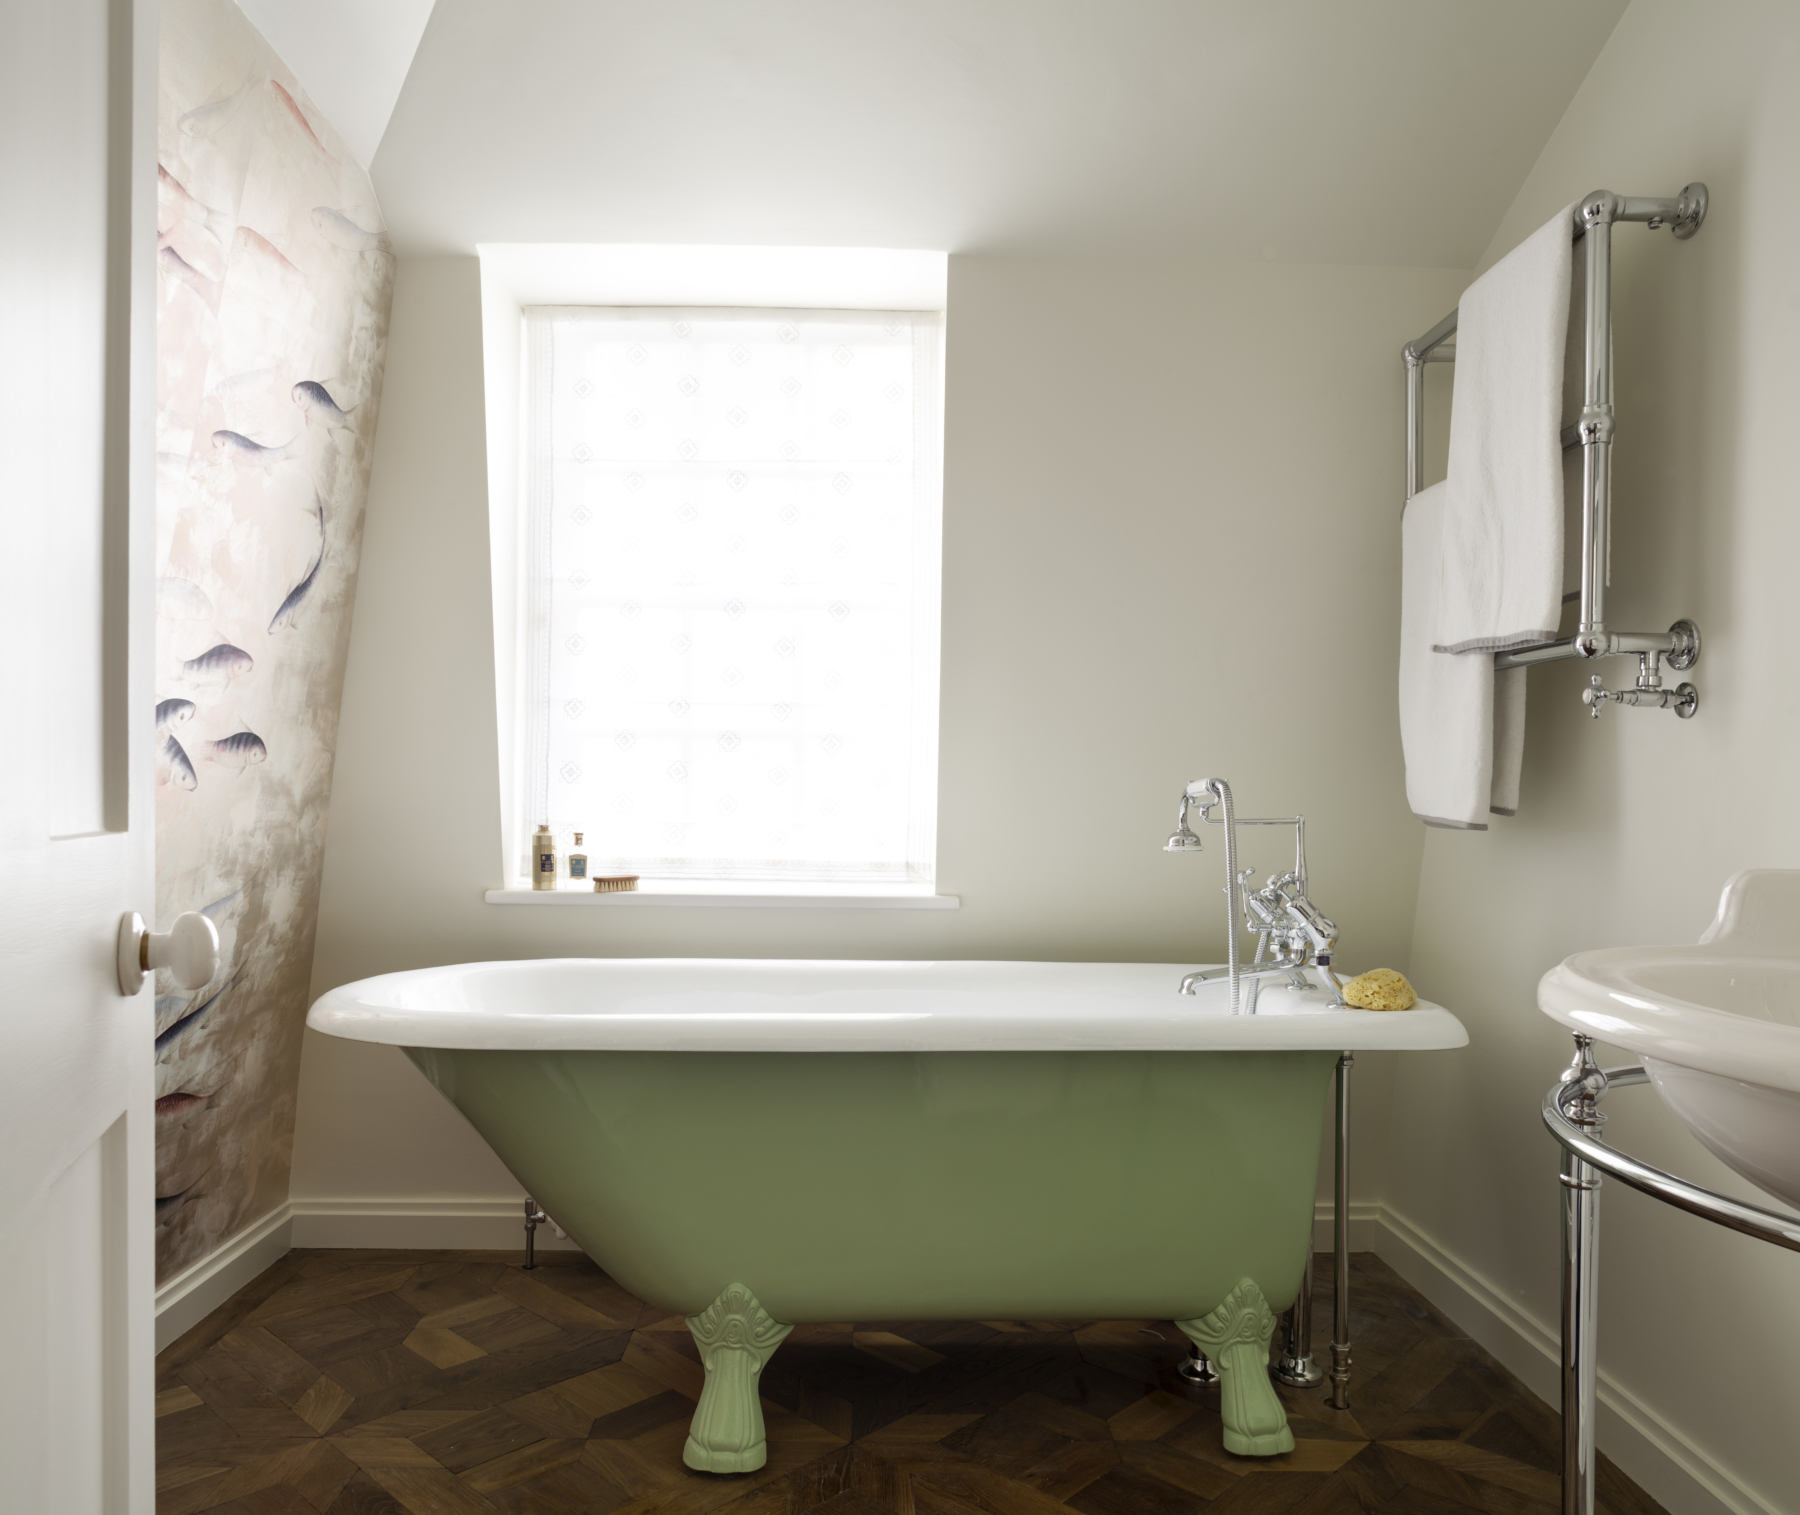 The Clyde Single Ended Cast Iron Bath Tub - Drummonds Bathrooms